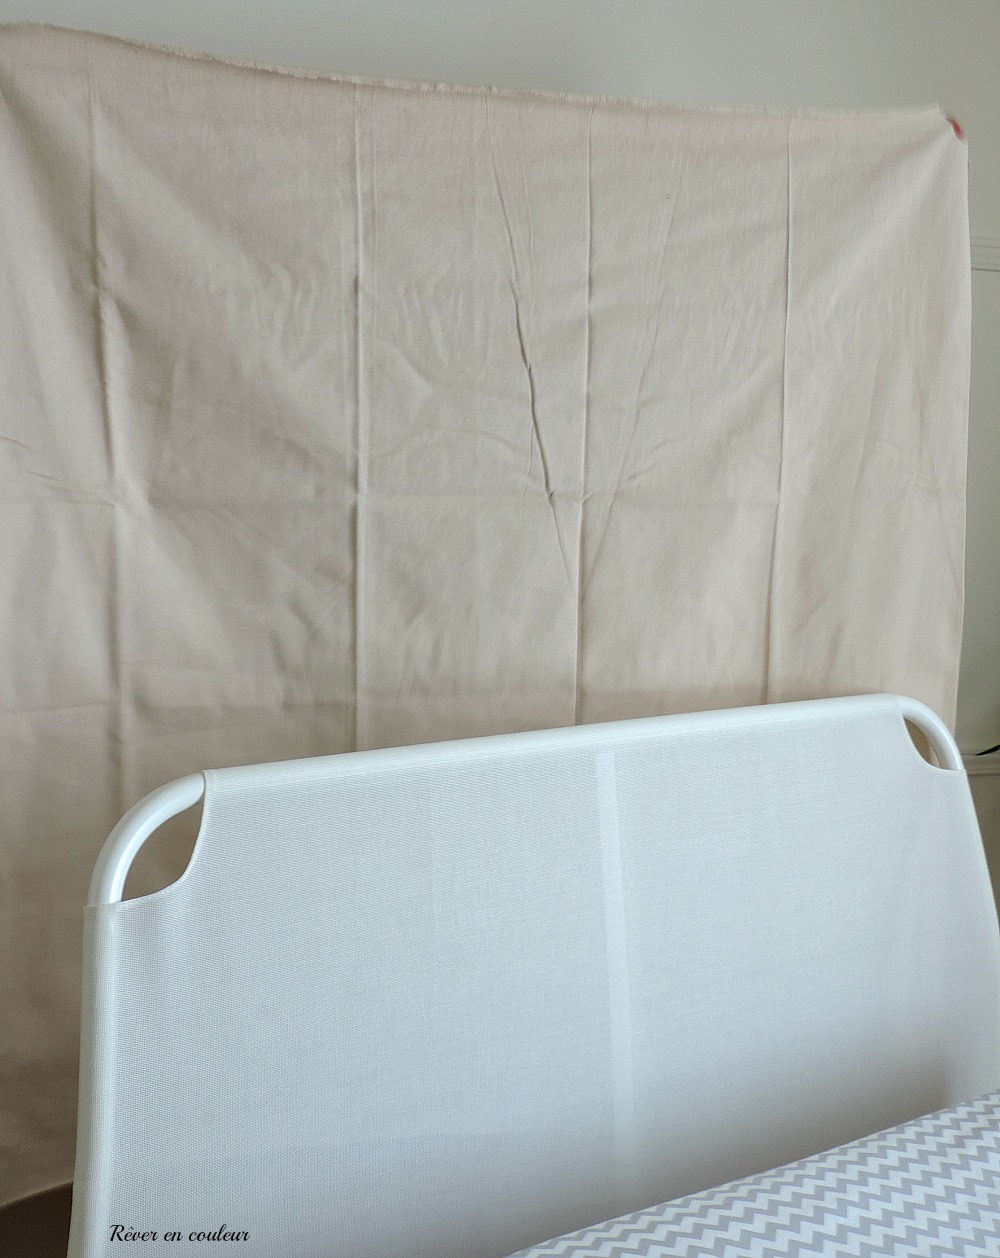 Making a new headboard with drop cloth and paint